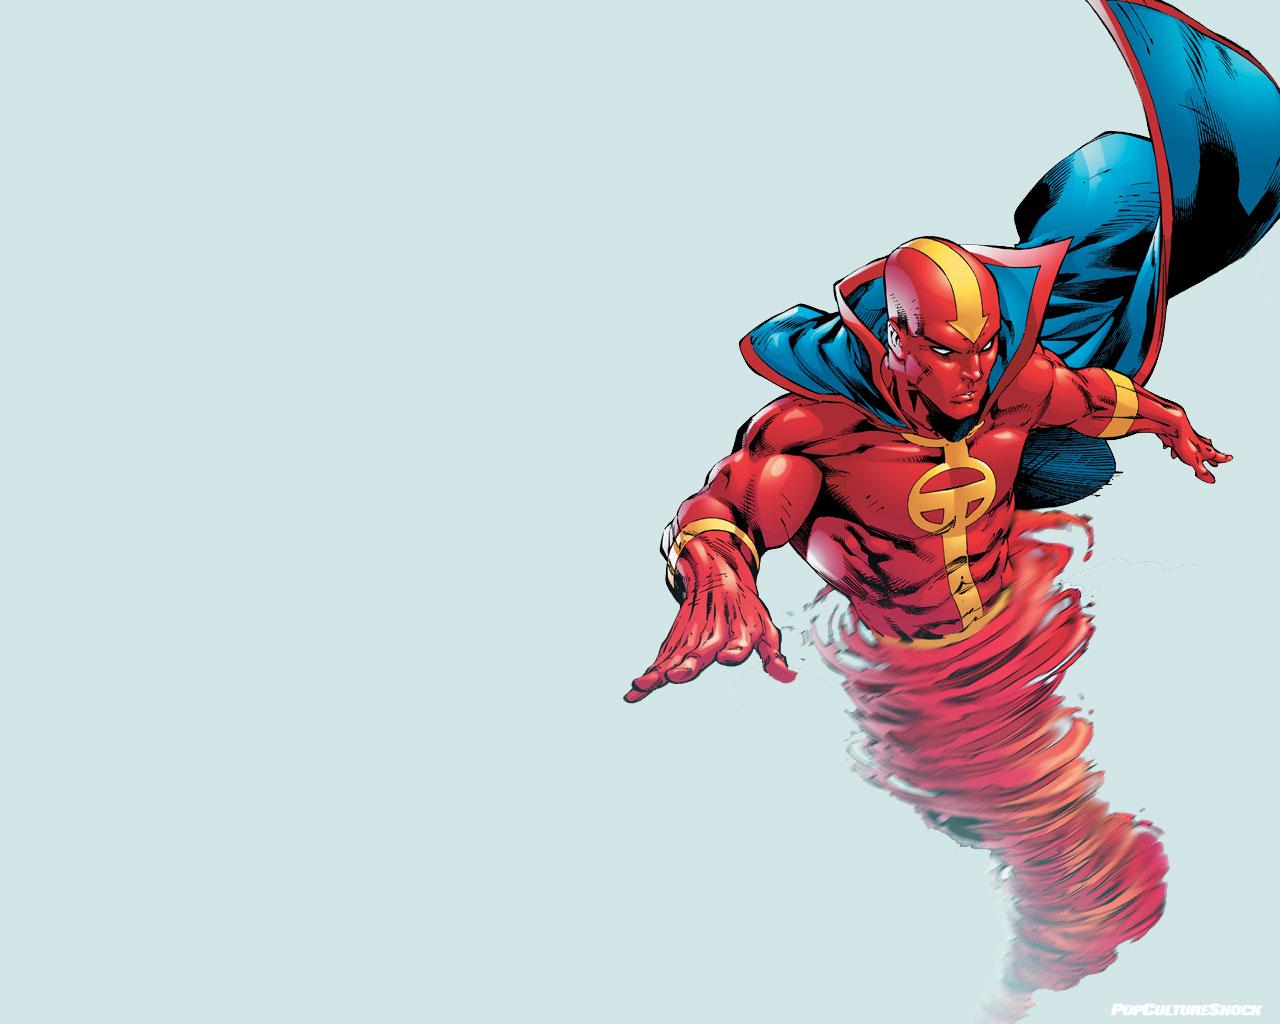 Red Tornado Wallpaper and Background Imagex1024